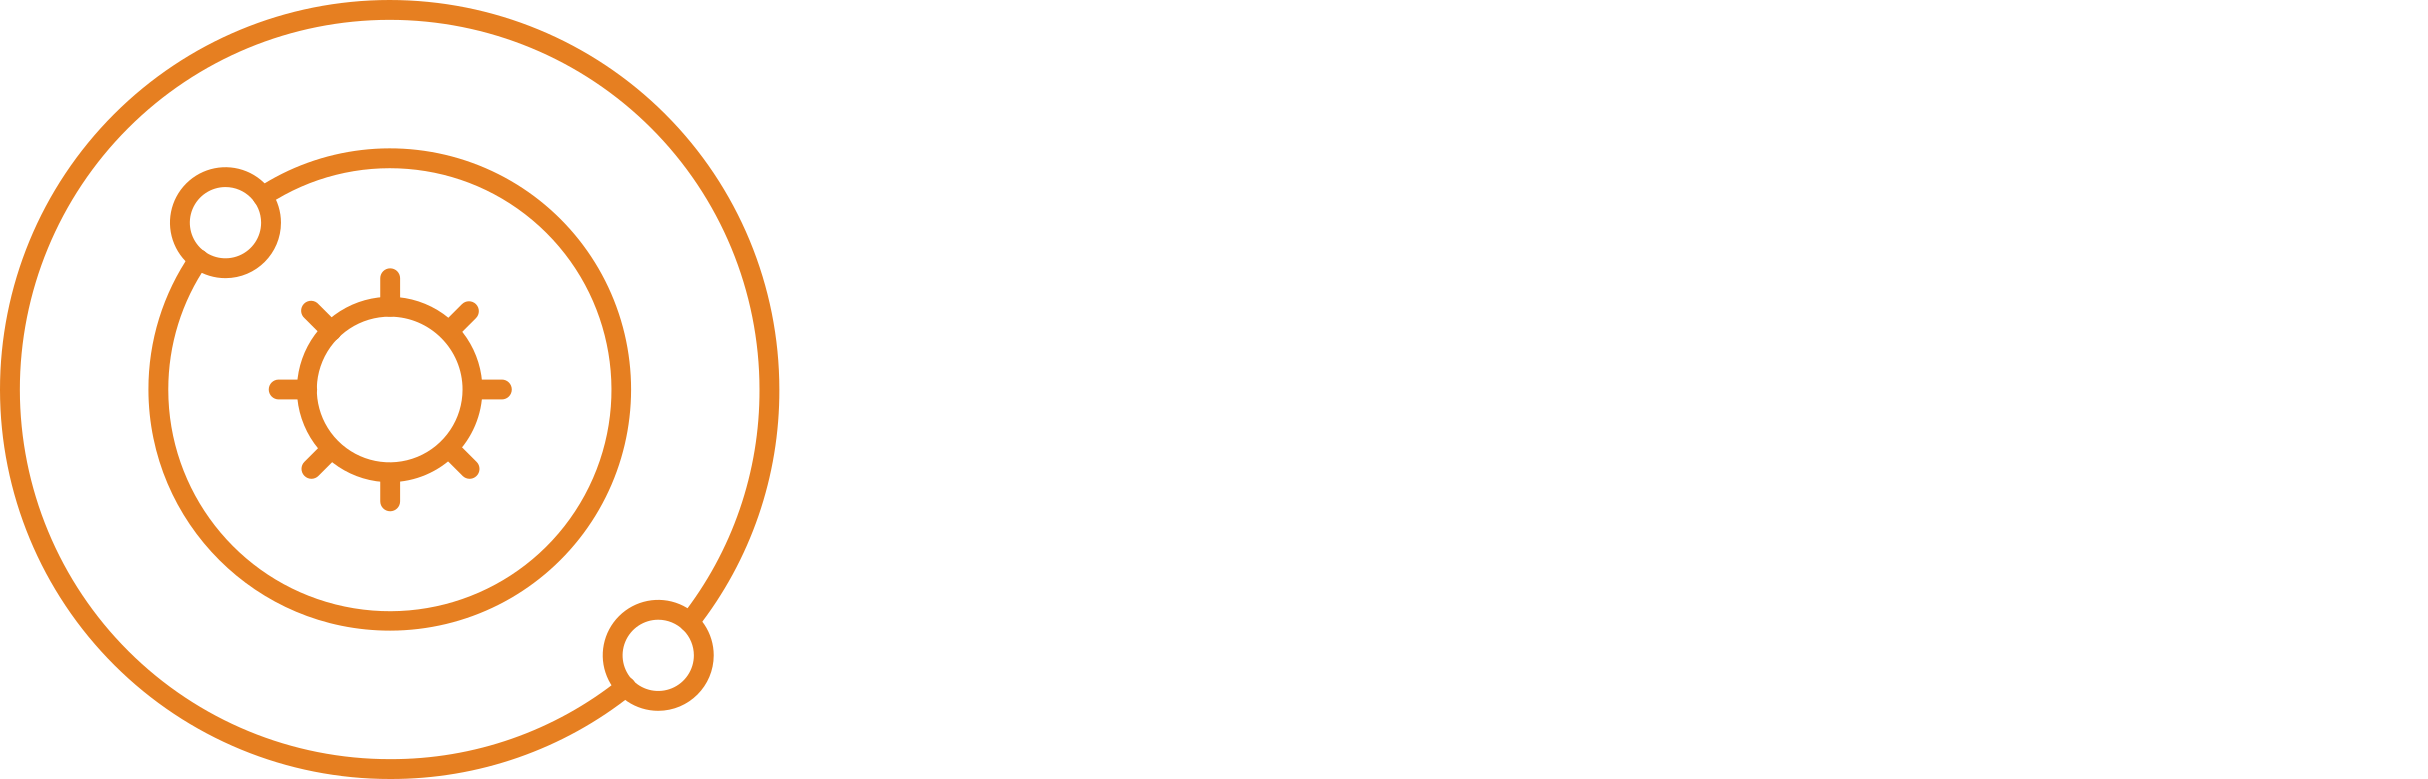 Mission critical group logo